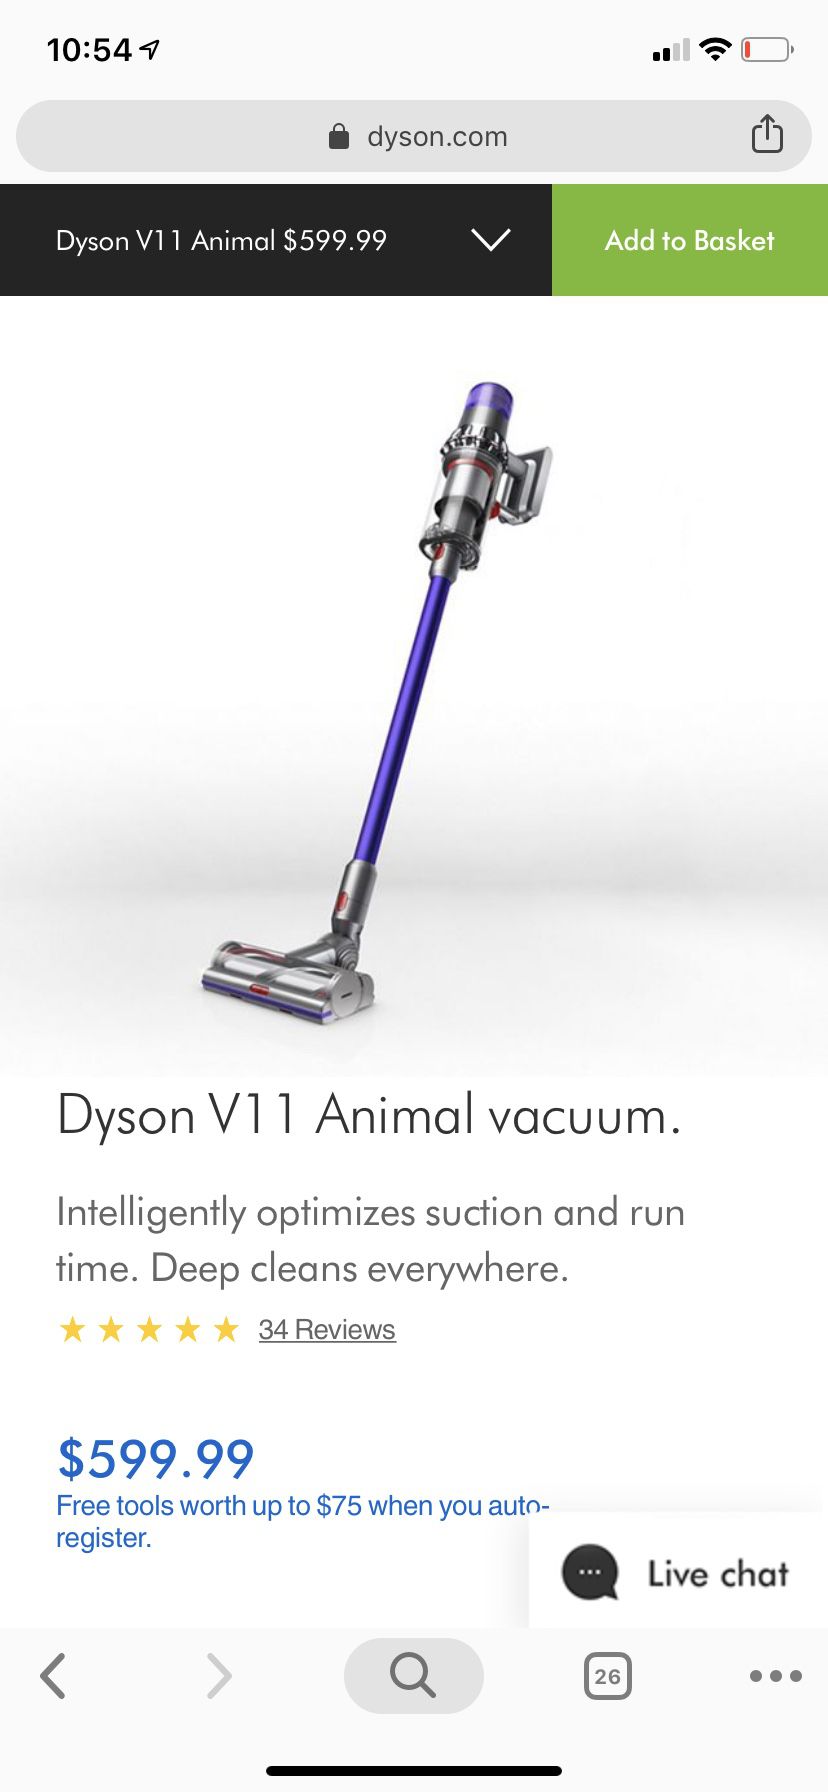 Dyson V11 Animal vacuum. Intelligently optimizes suction and run time. Deep cleans everywhere. /Brand New, Sealed